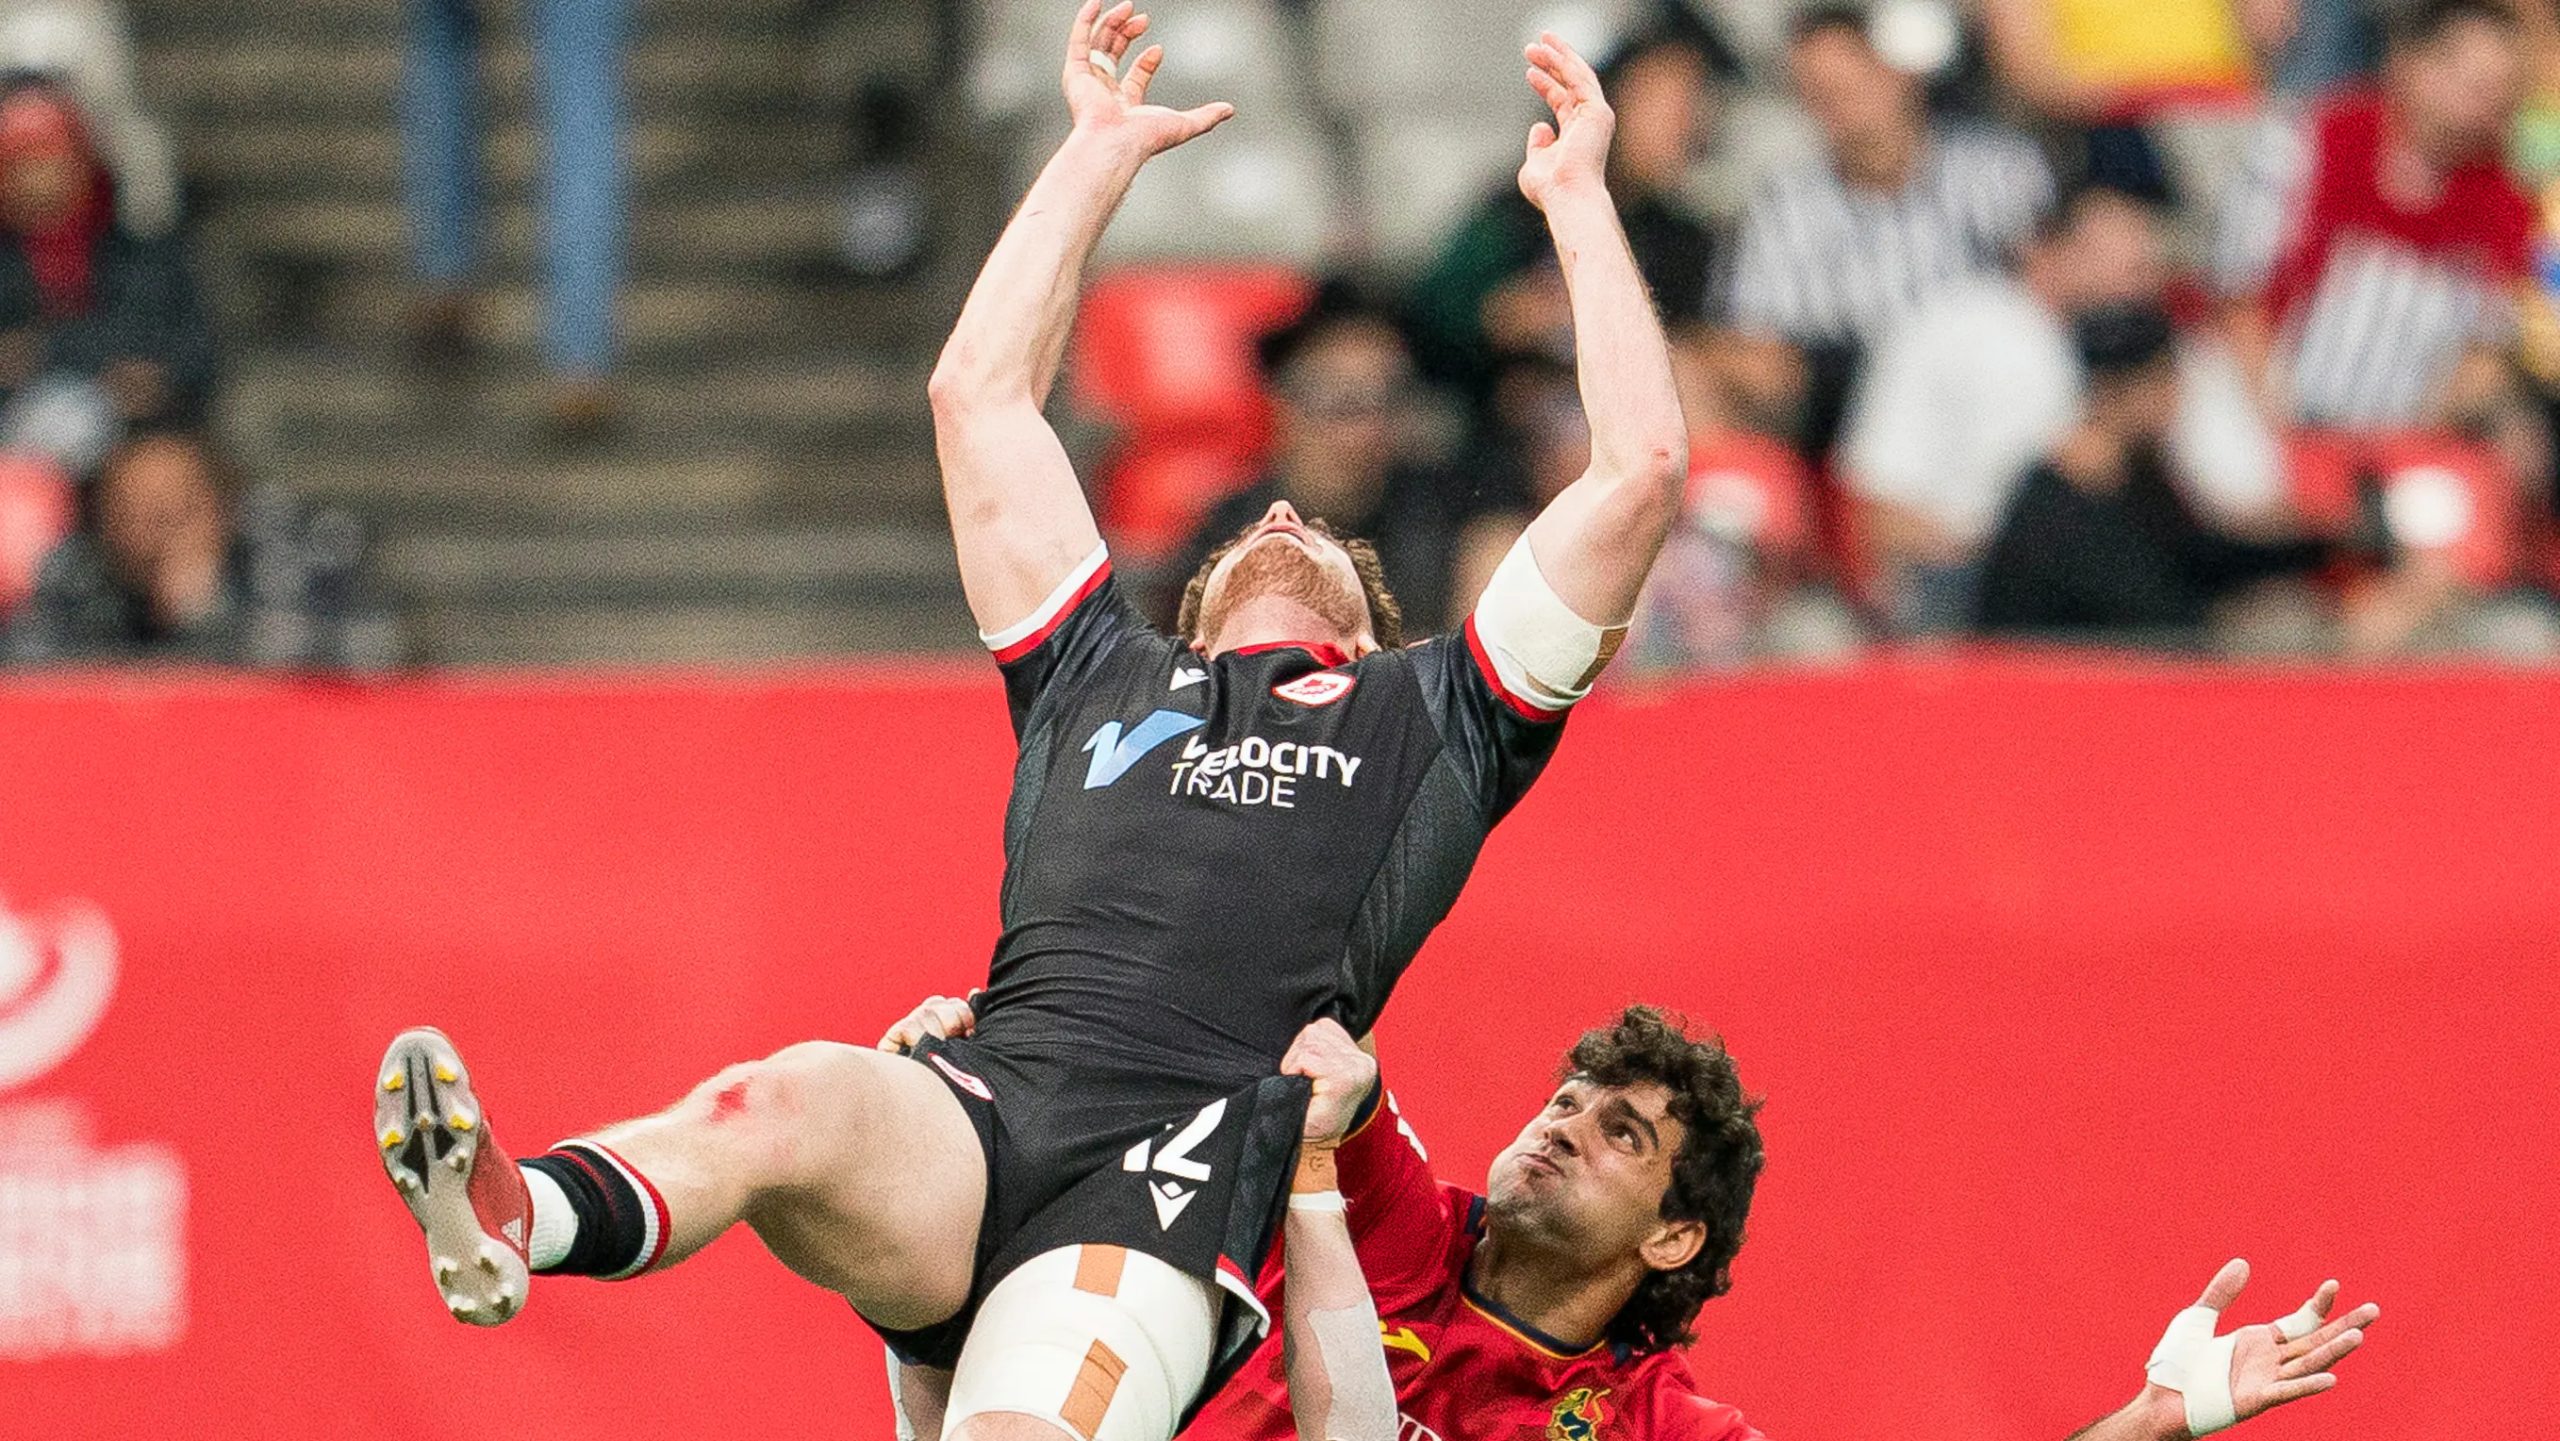 Canada beats Spain to return to the 7S Rugby Series in Vancouver